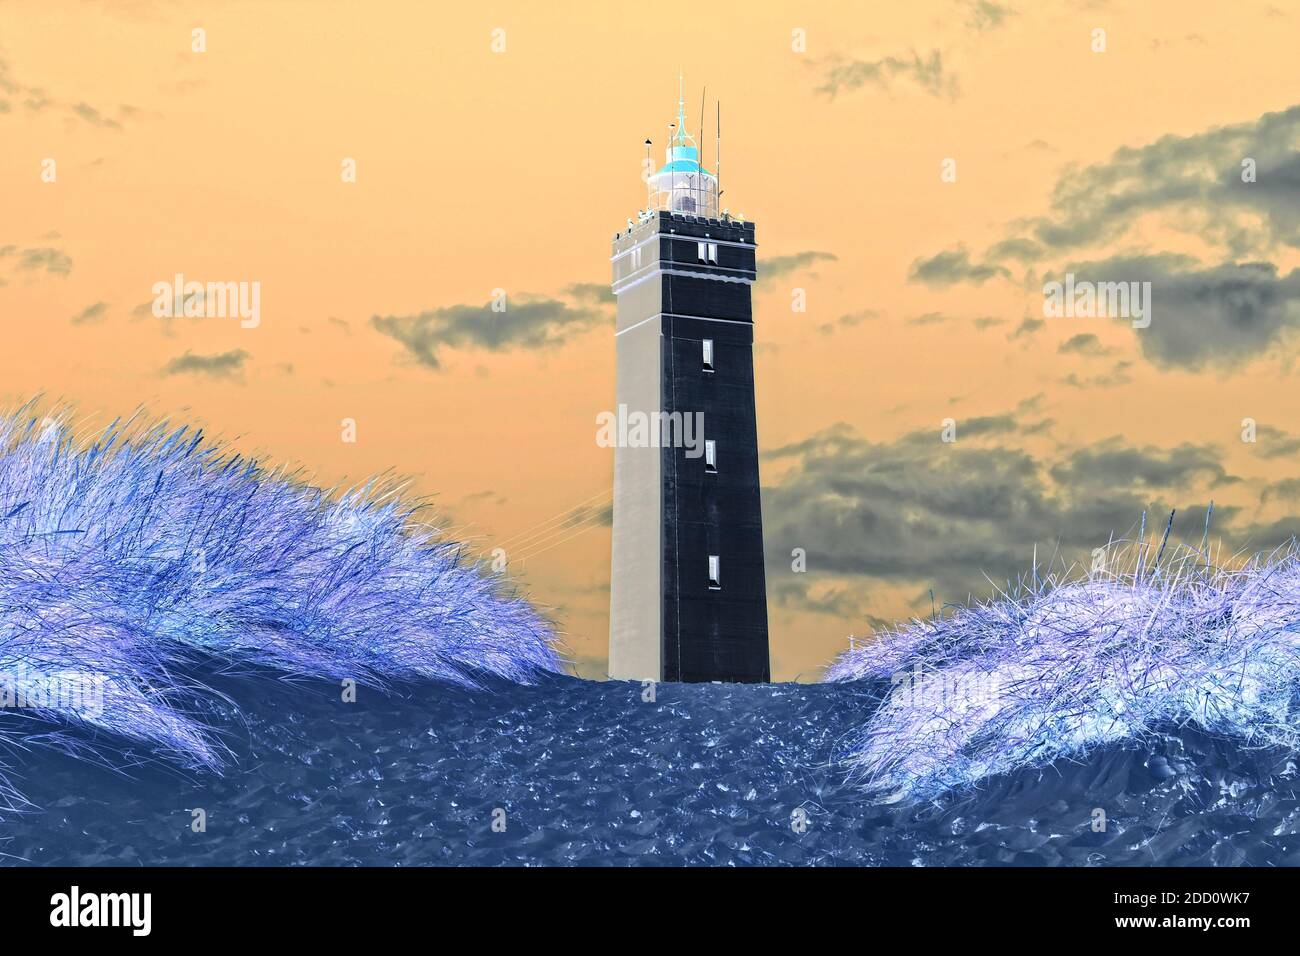 Atmospheric image of a lighthouse in Denmark on the north sea coast.  Colour inversions and other modifications have been made to the original image. Stock Photo